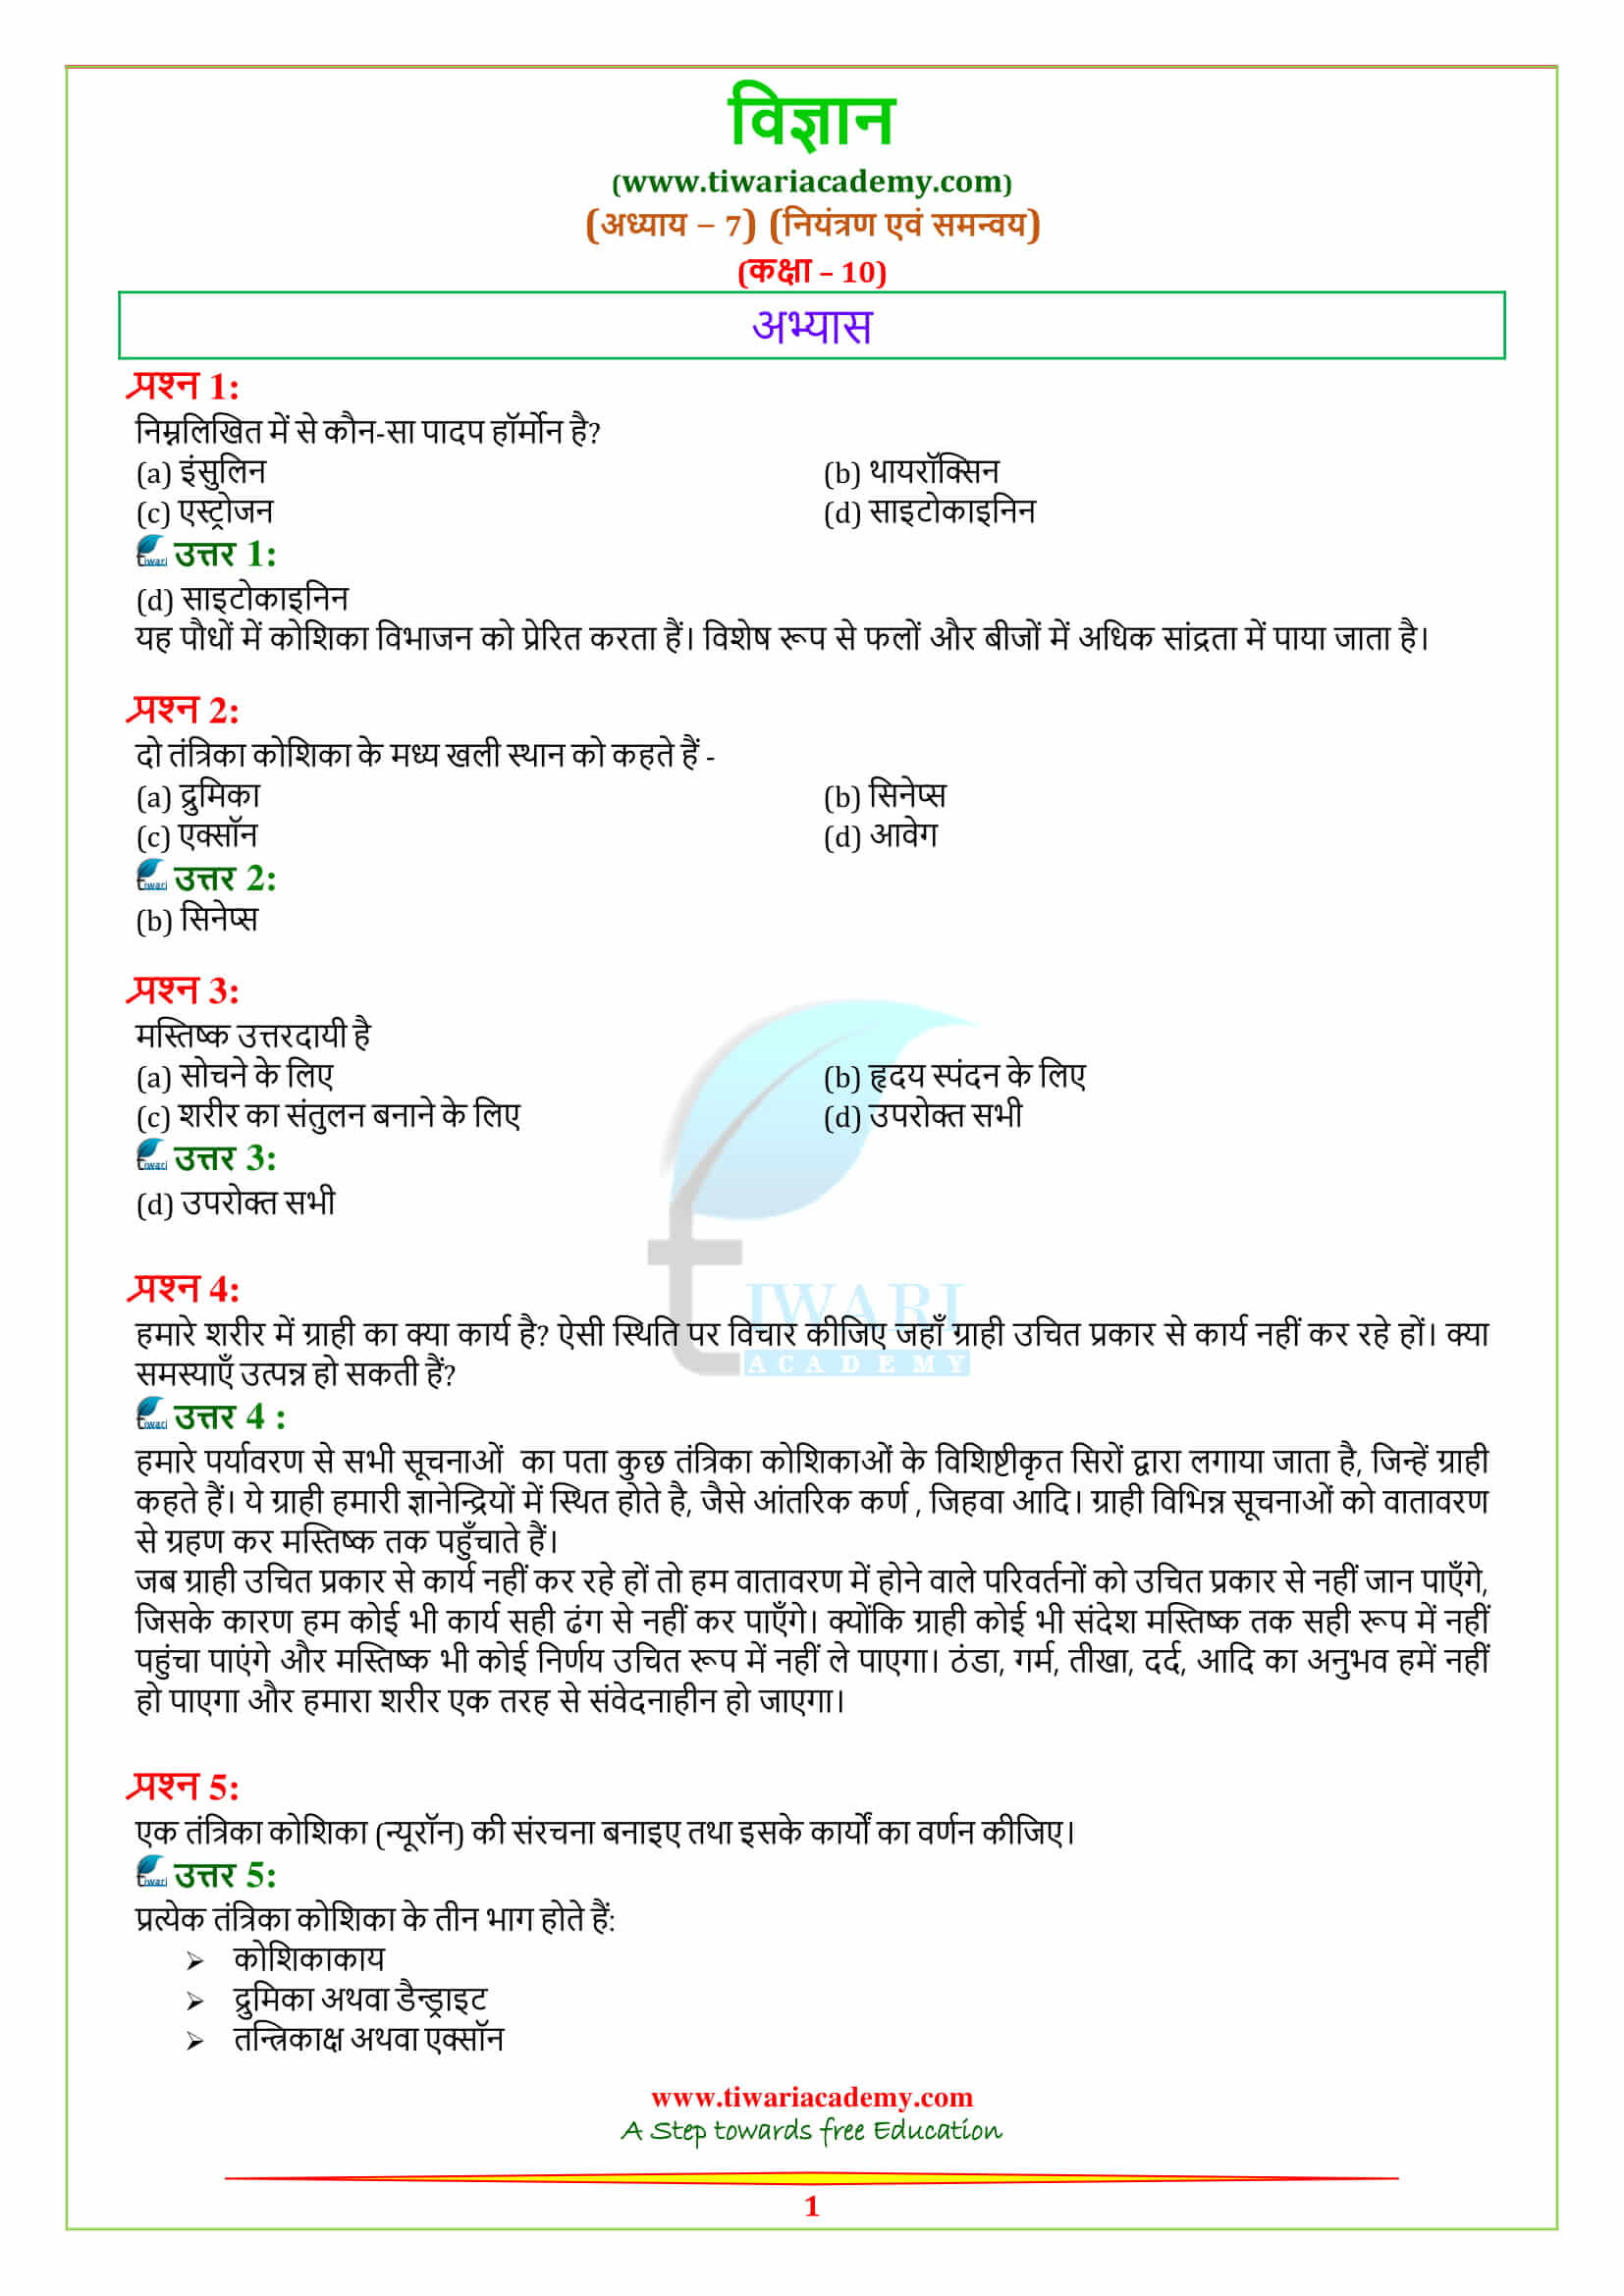 NCERT Solutions for Class 10 Science Chapter 7 Control and Coordination अभ्यास के प्रश्न उत्तर